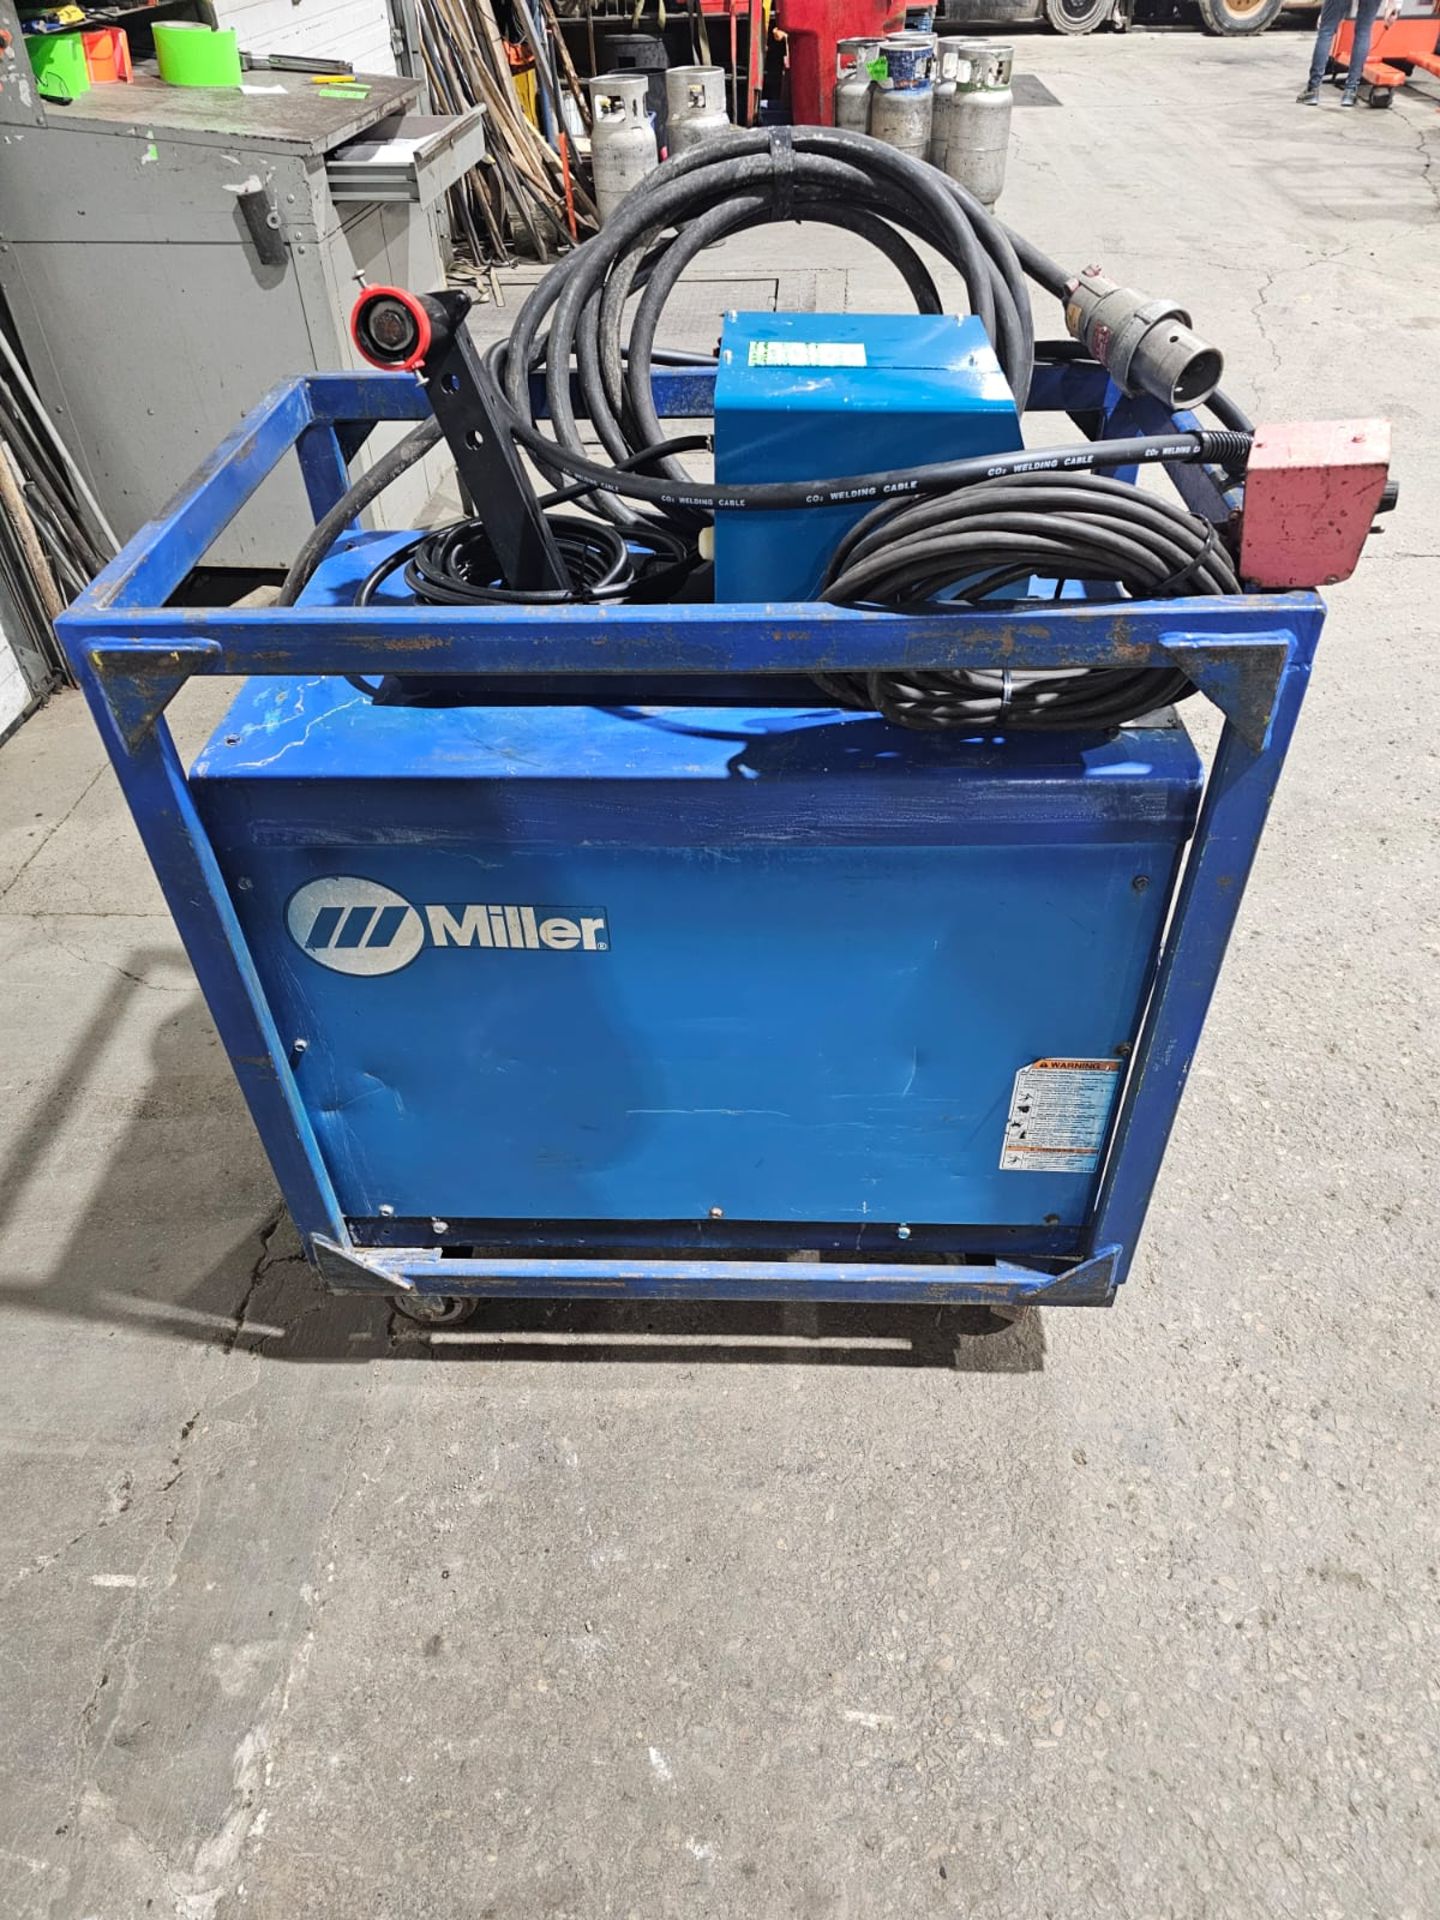 Miller Dimension 652 Mig Welder 650 Amp Mig Tig Stick Multi Process Power Source with 22A Wire - Image 2 of 6